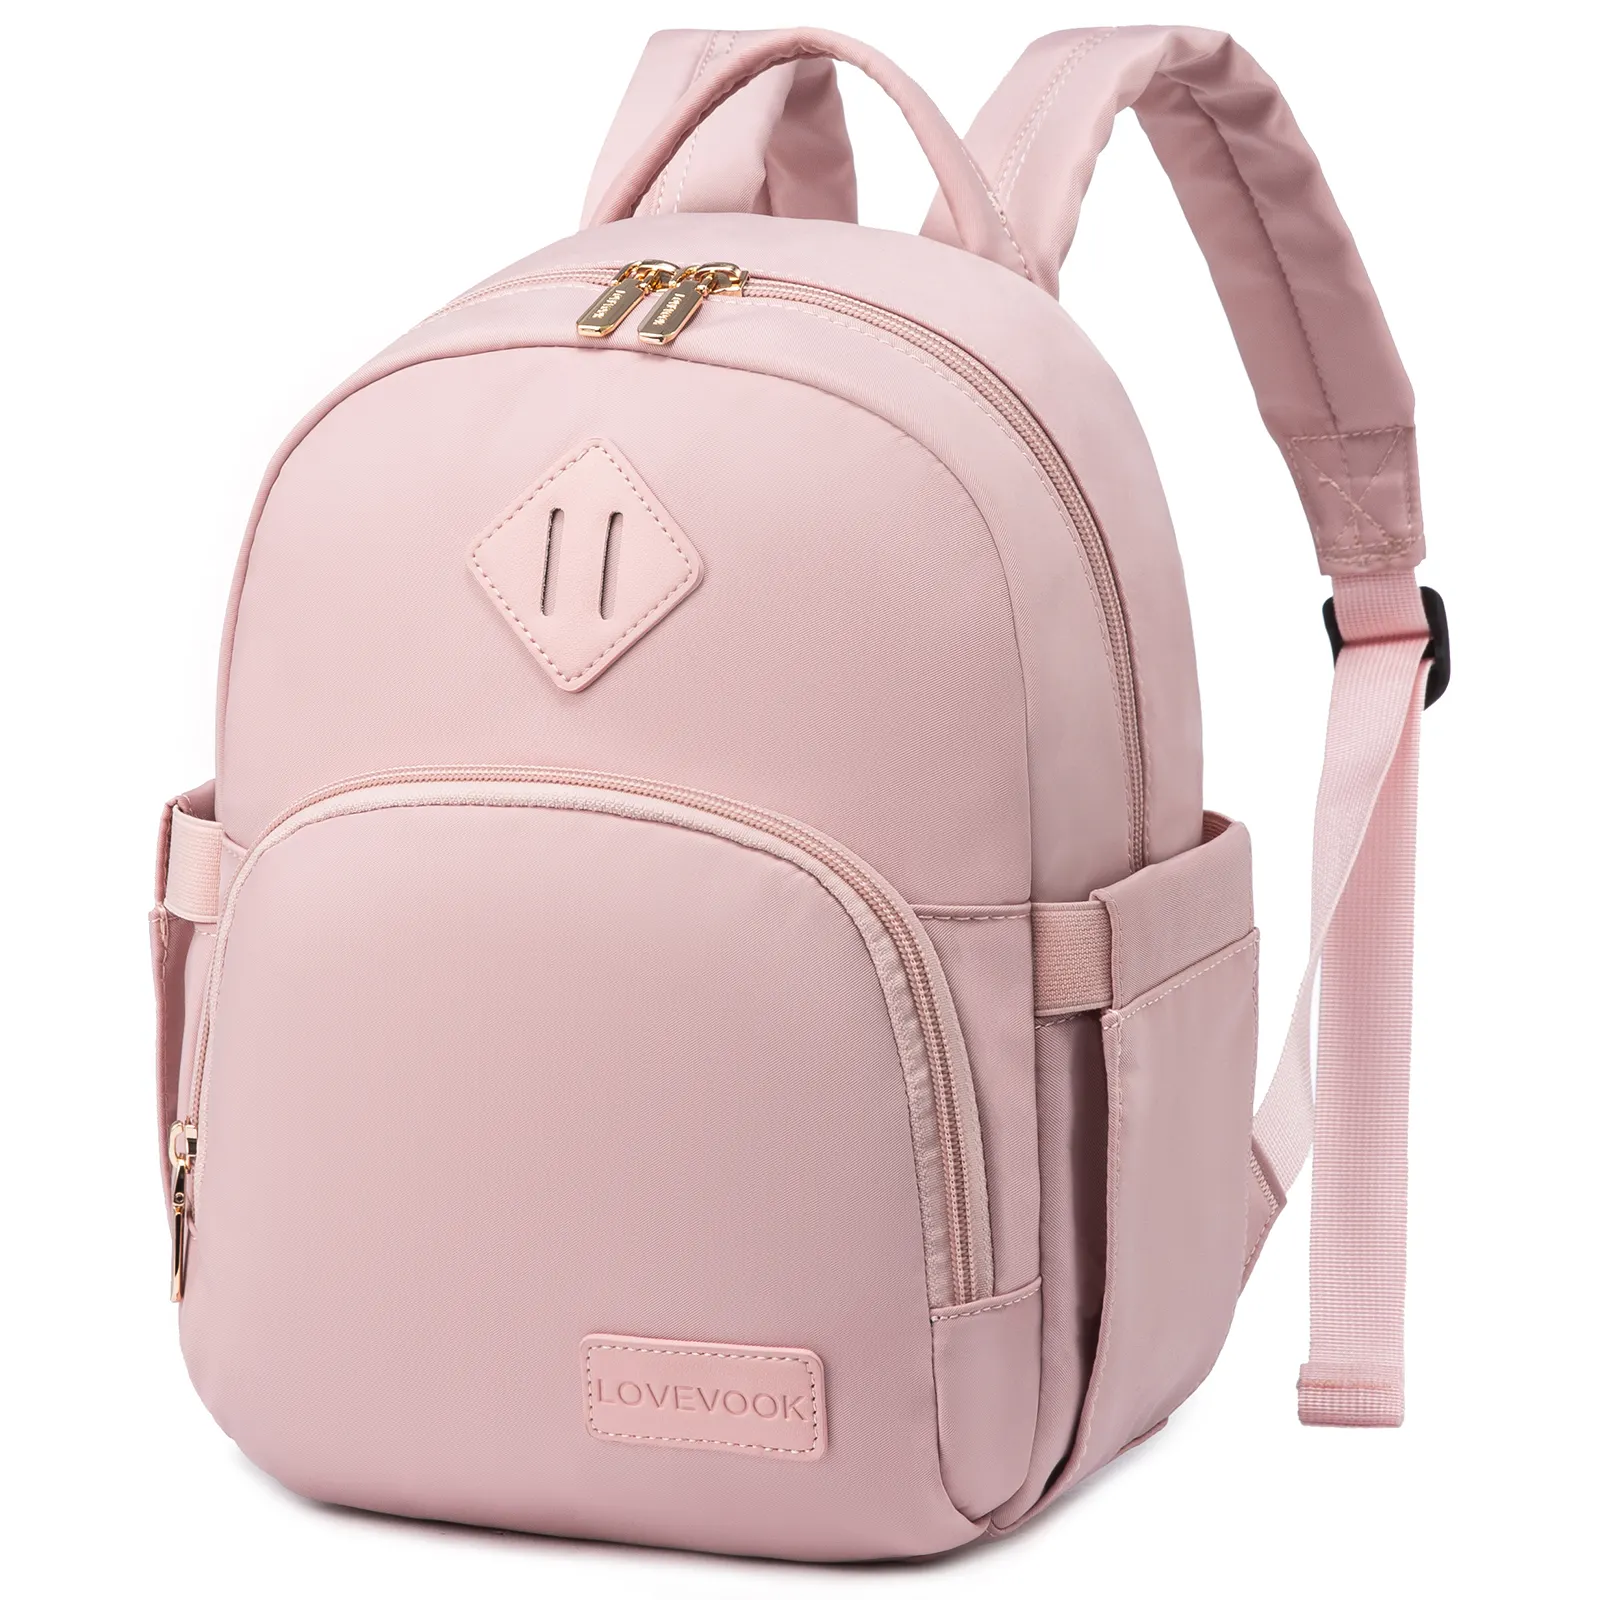 LOVEVOOK Teen Girls Small Fashion Backpack Bags Lightweight Cute Daypack for Travel School Mini Backpacks Purse for Women